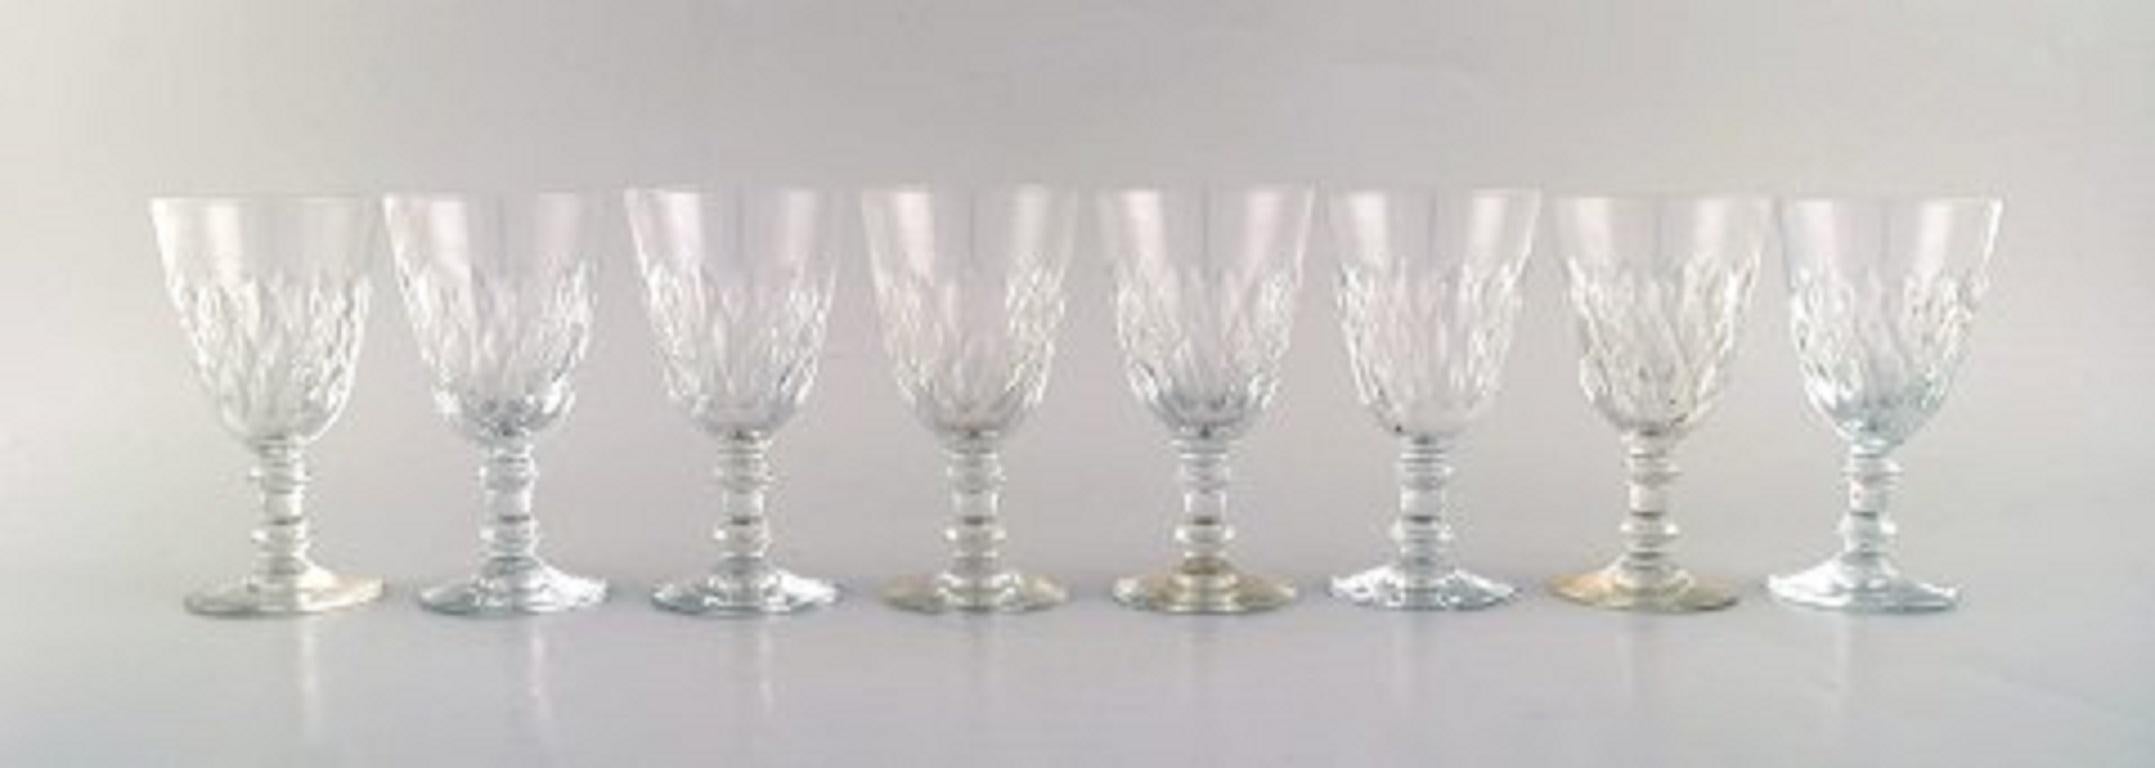 Baccarat, France. Eight Armagnac glass in mouth-blown crystal glass. Produced in the period 1952-1986.
Measures: 11 x 6 cm.
In very good condition.
Stamped.